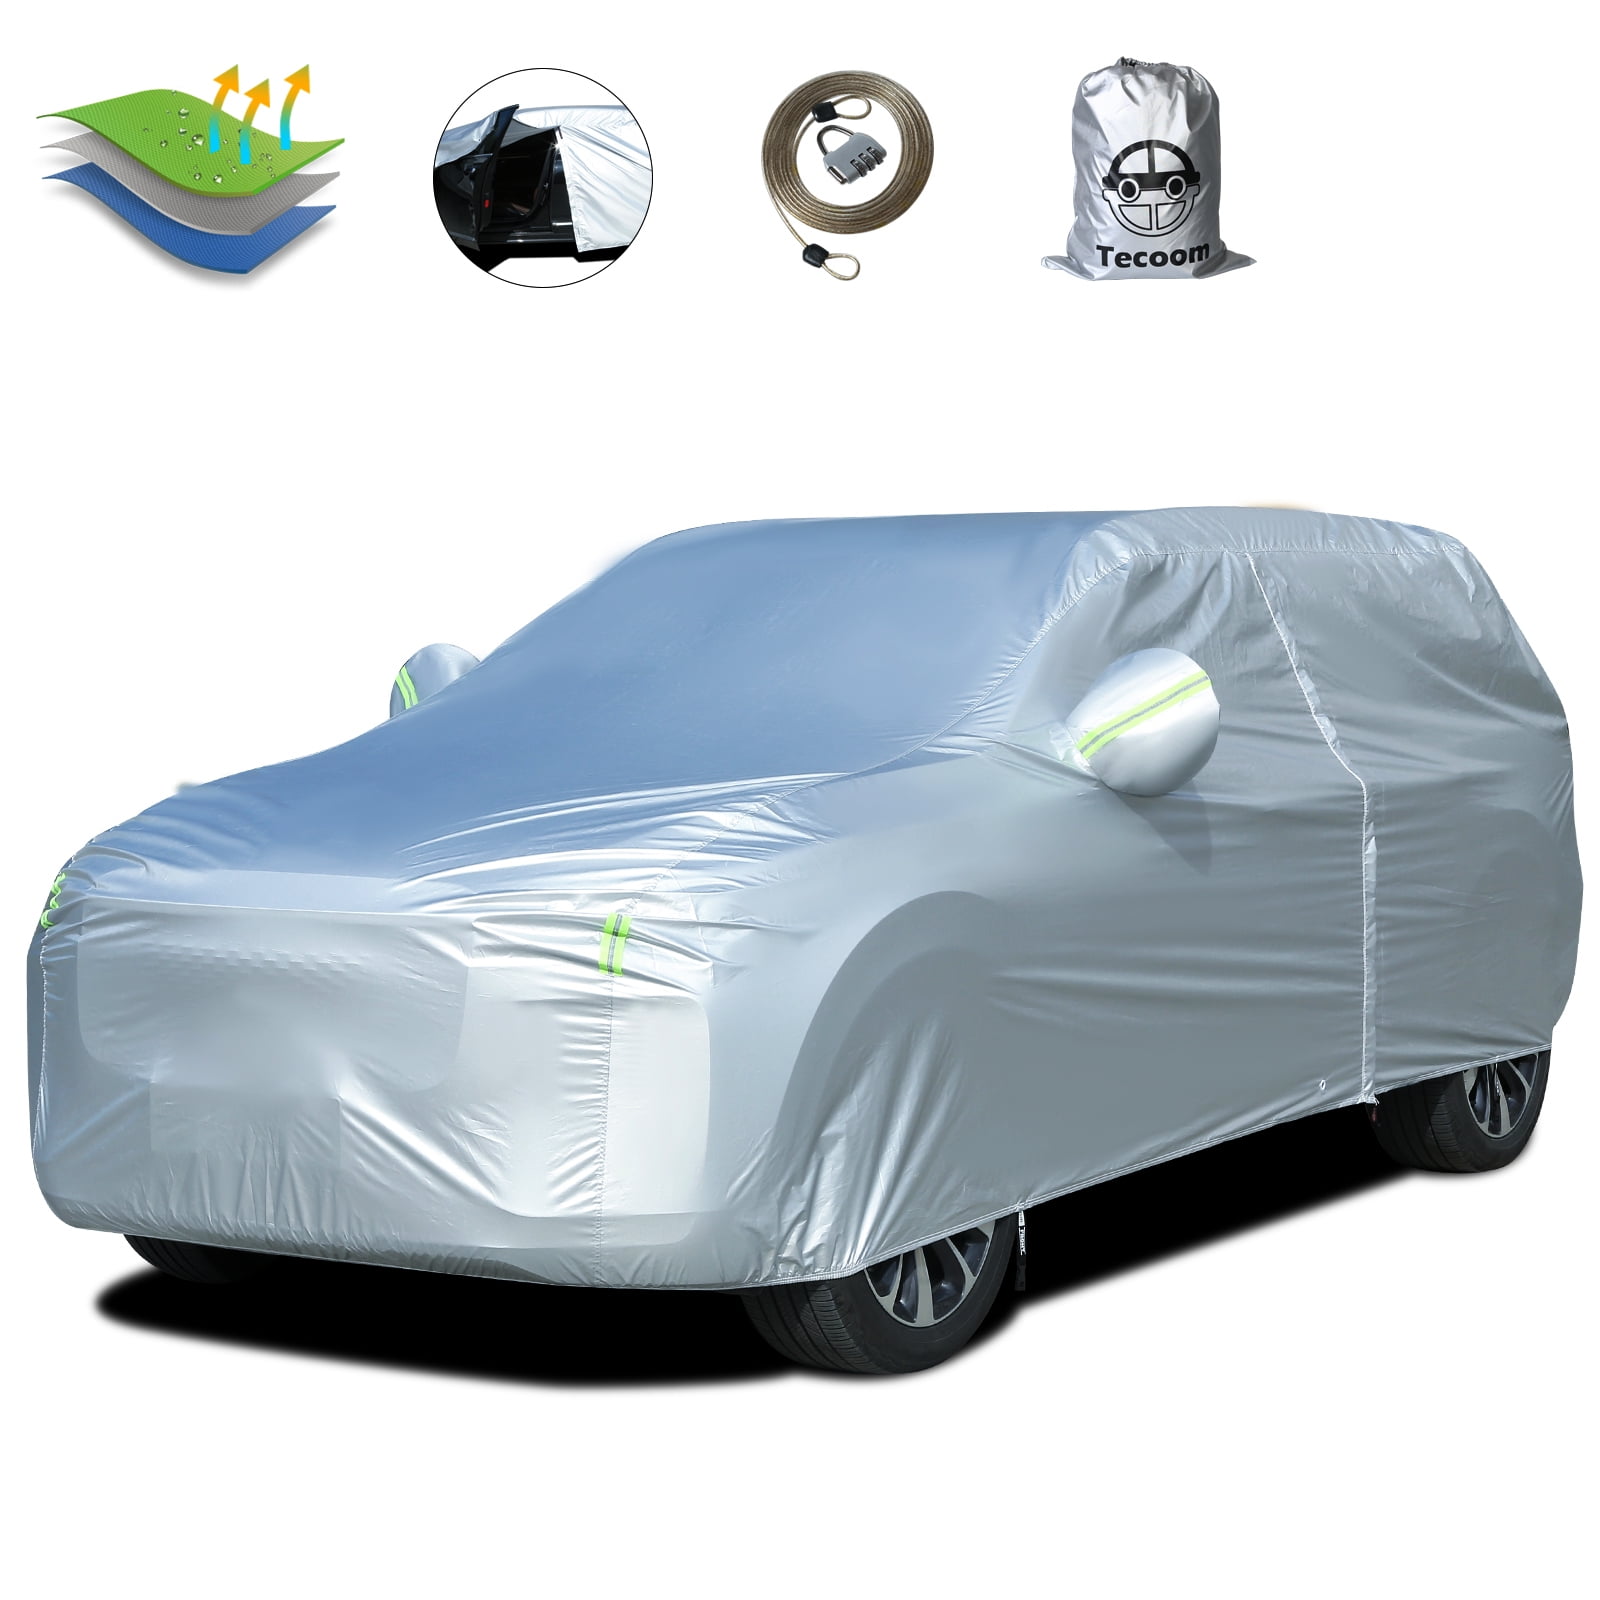 Tecoom SSC05 Breathable Material Classic Zipper Design Waterproof UV-Proof Windproof Car Cover for All Weather Indoor Outdoor Fit 180-195 inches SUV 